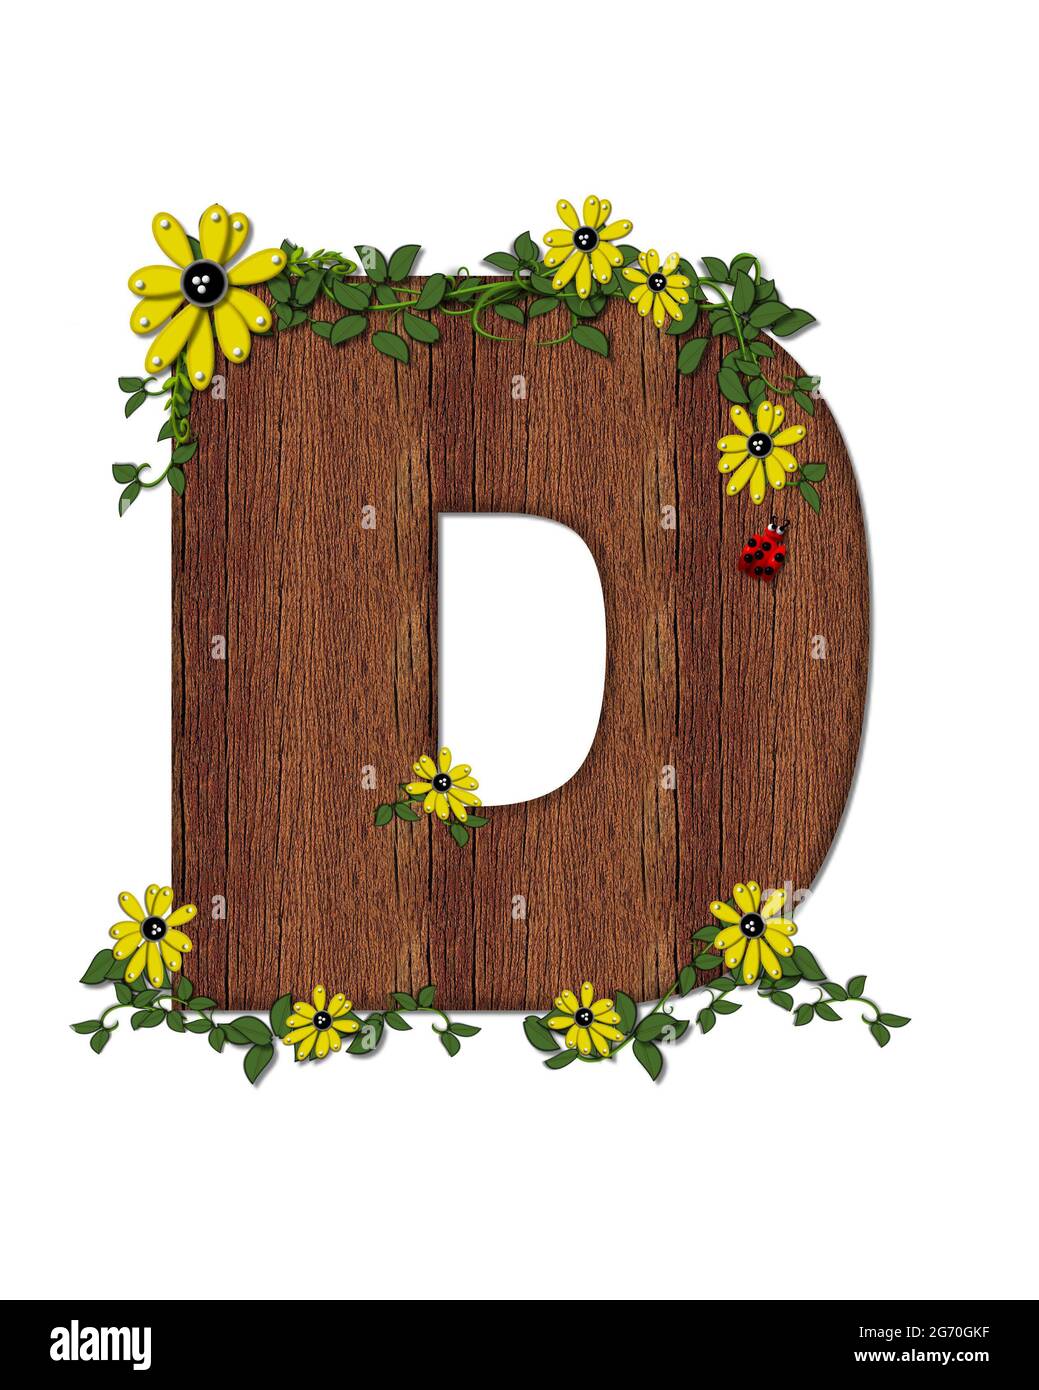 The letter D, in the alphabet set 'Ladybug and Sunflower' is filled with wood texture.  Ladybug, sunflowers and vines decorate letter. Stock Photo